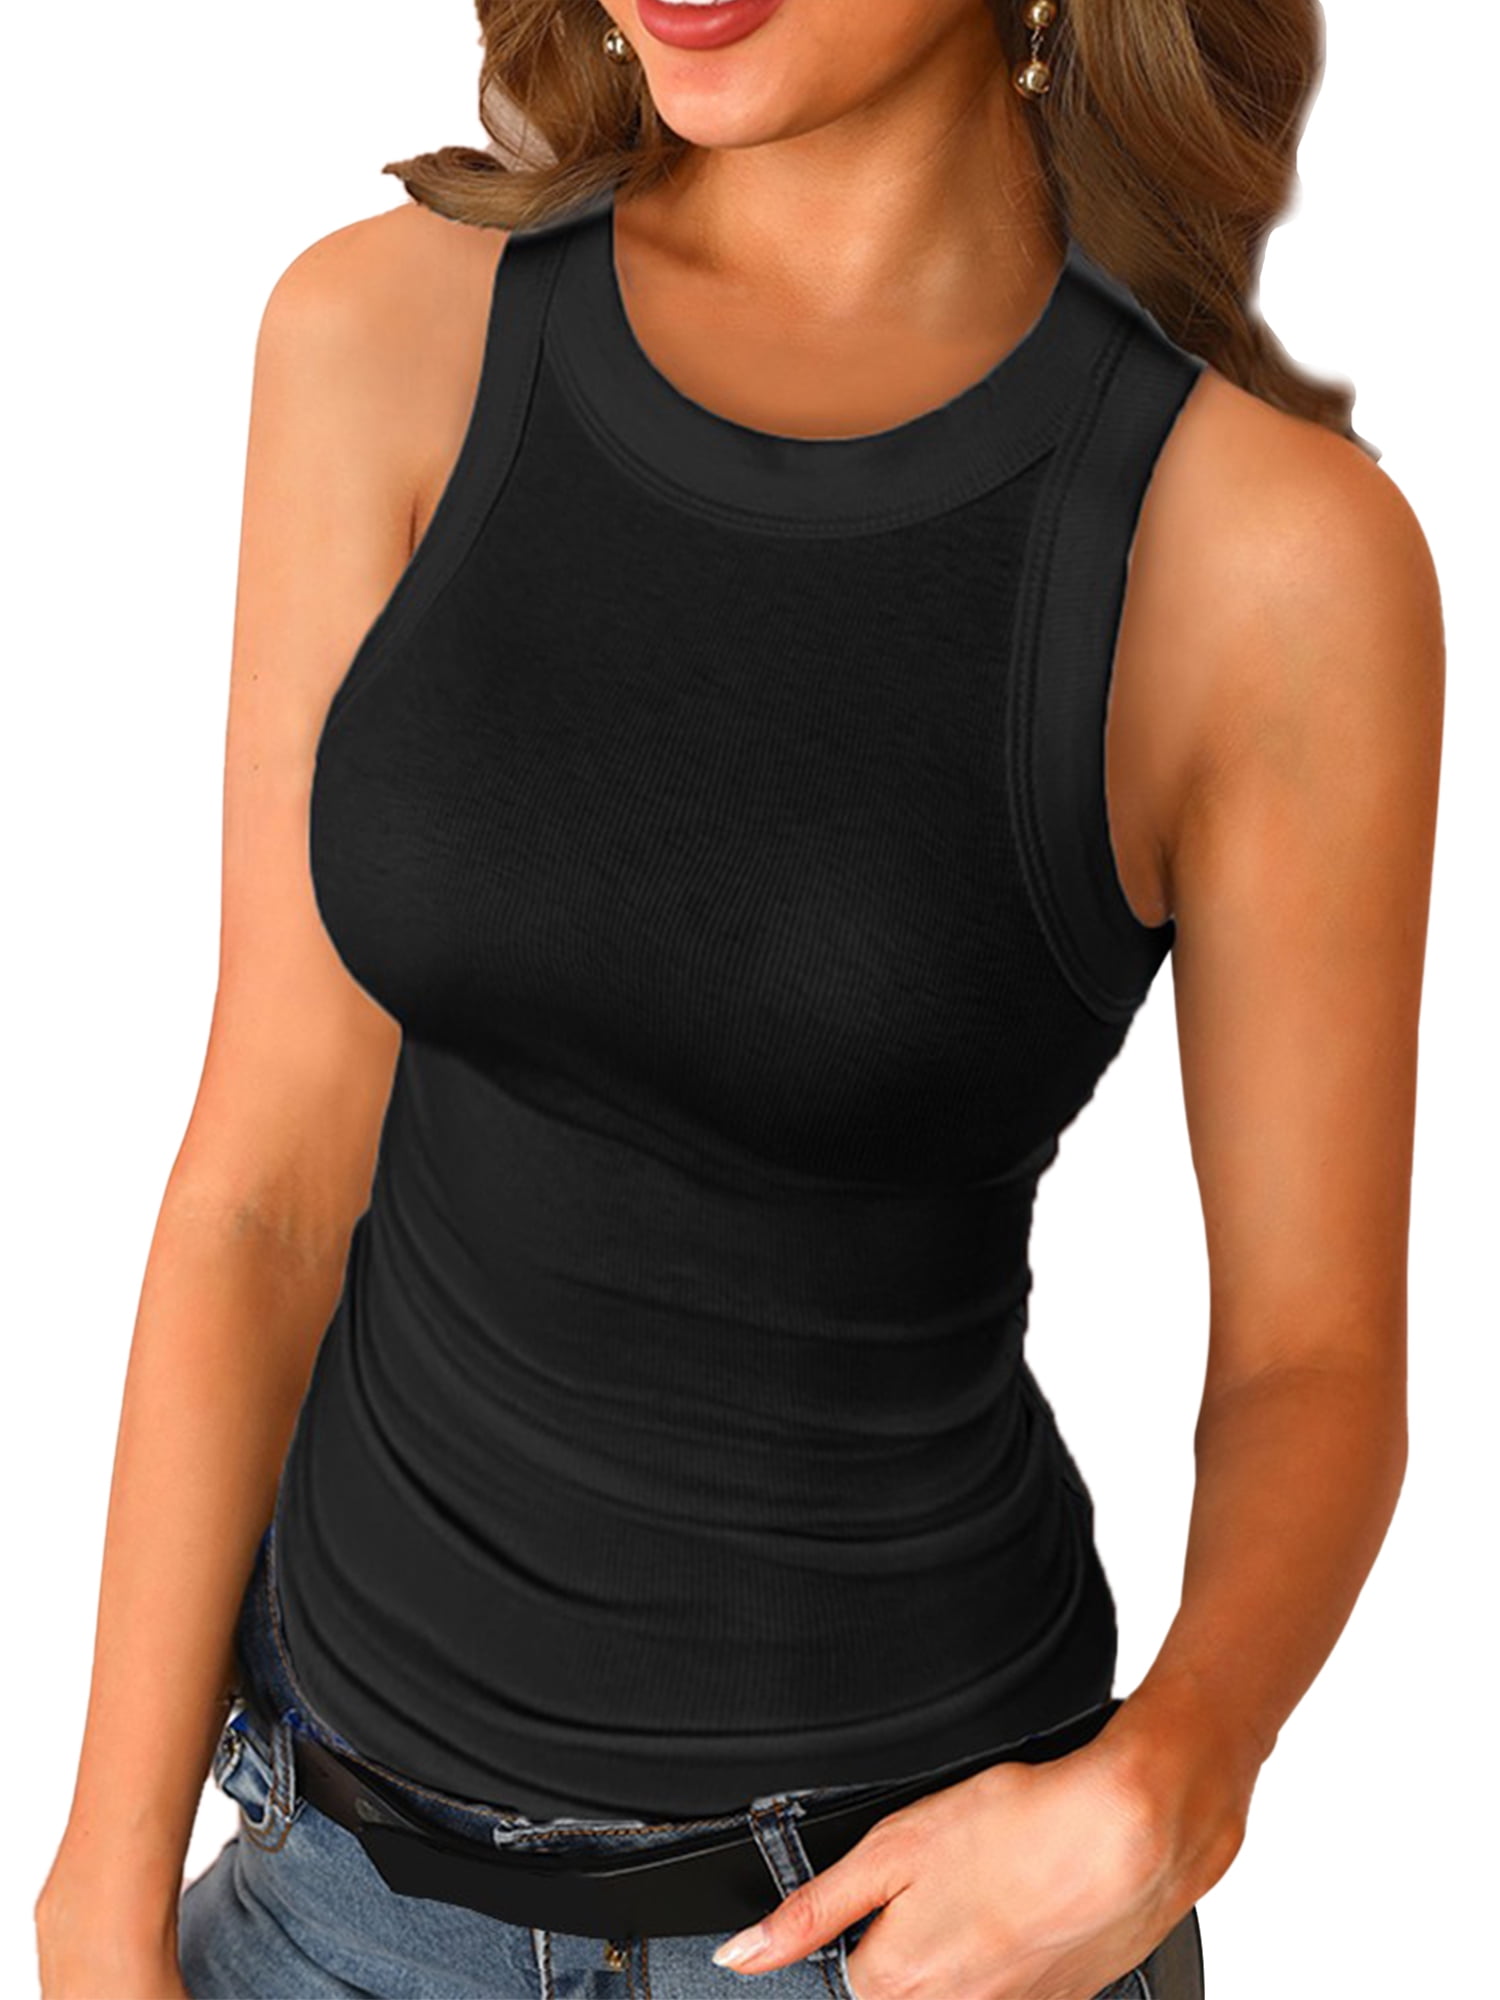 Workout Tank Top Sleevelss Ribbed Stretch Yoga Top Tthletic Compression Active Wear Seamless Tight Sports Running T Shirt Vest Black M=US 6-8 - Walmart.com